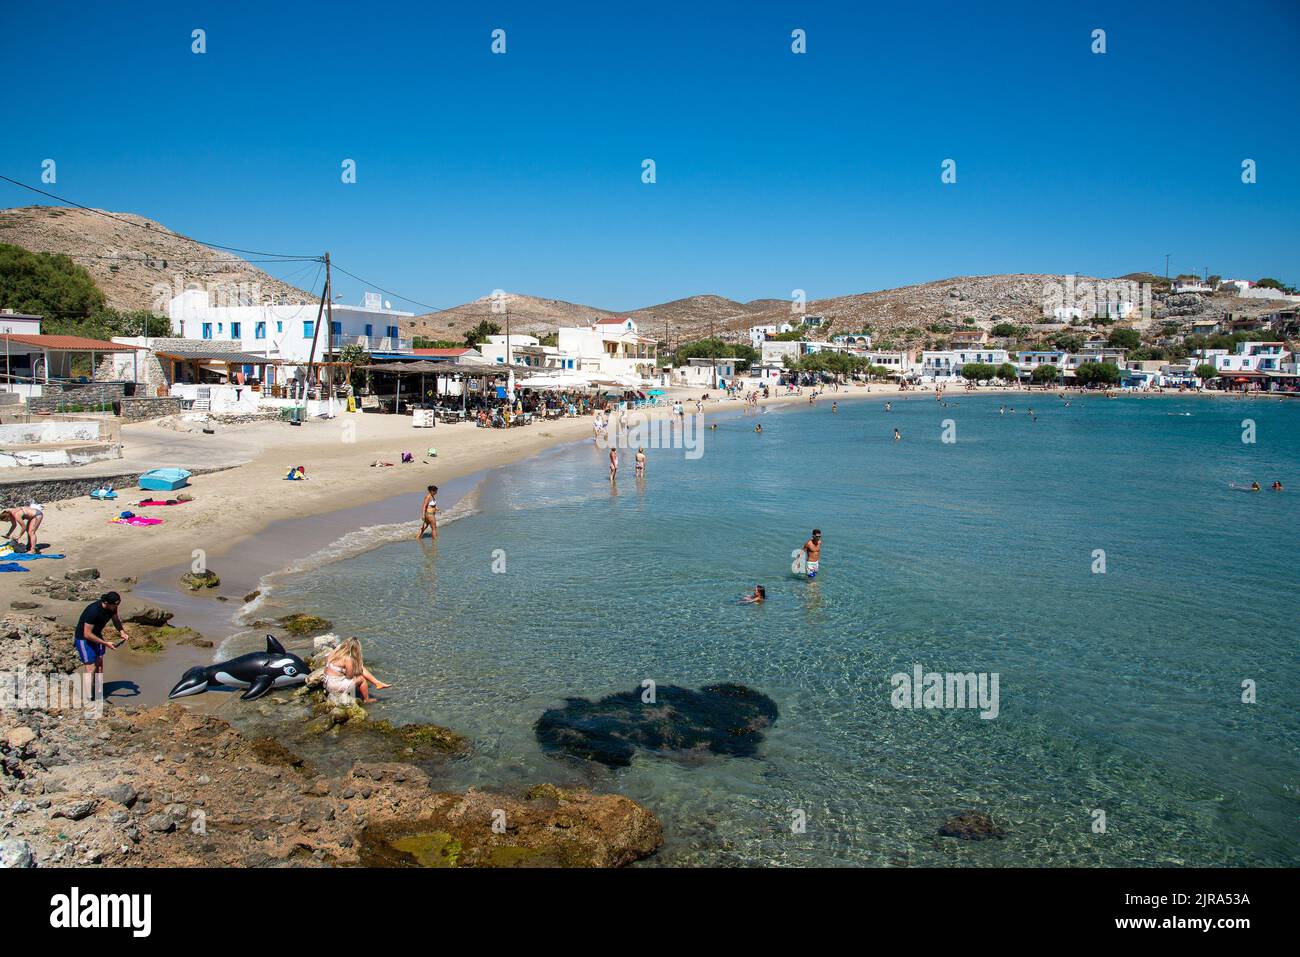 View of the beach at Pserimos, Kalymnos, Dodecanese, South Aegean, Greece. Stock Photo